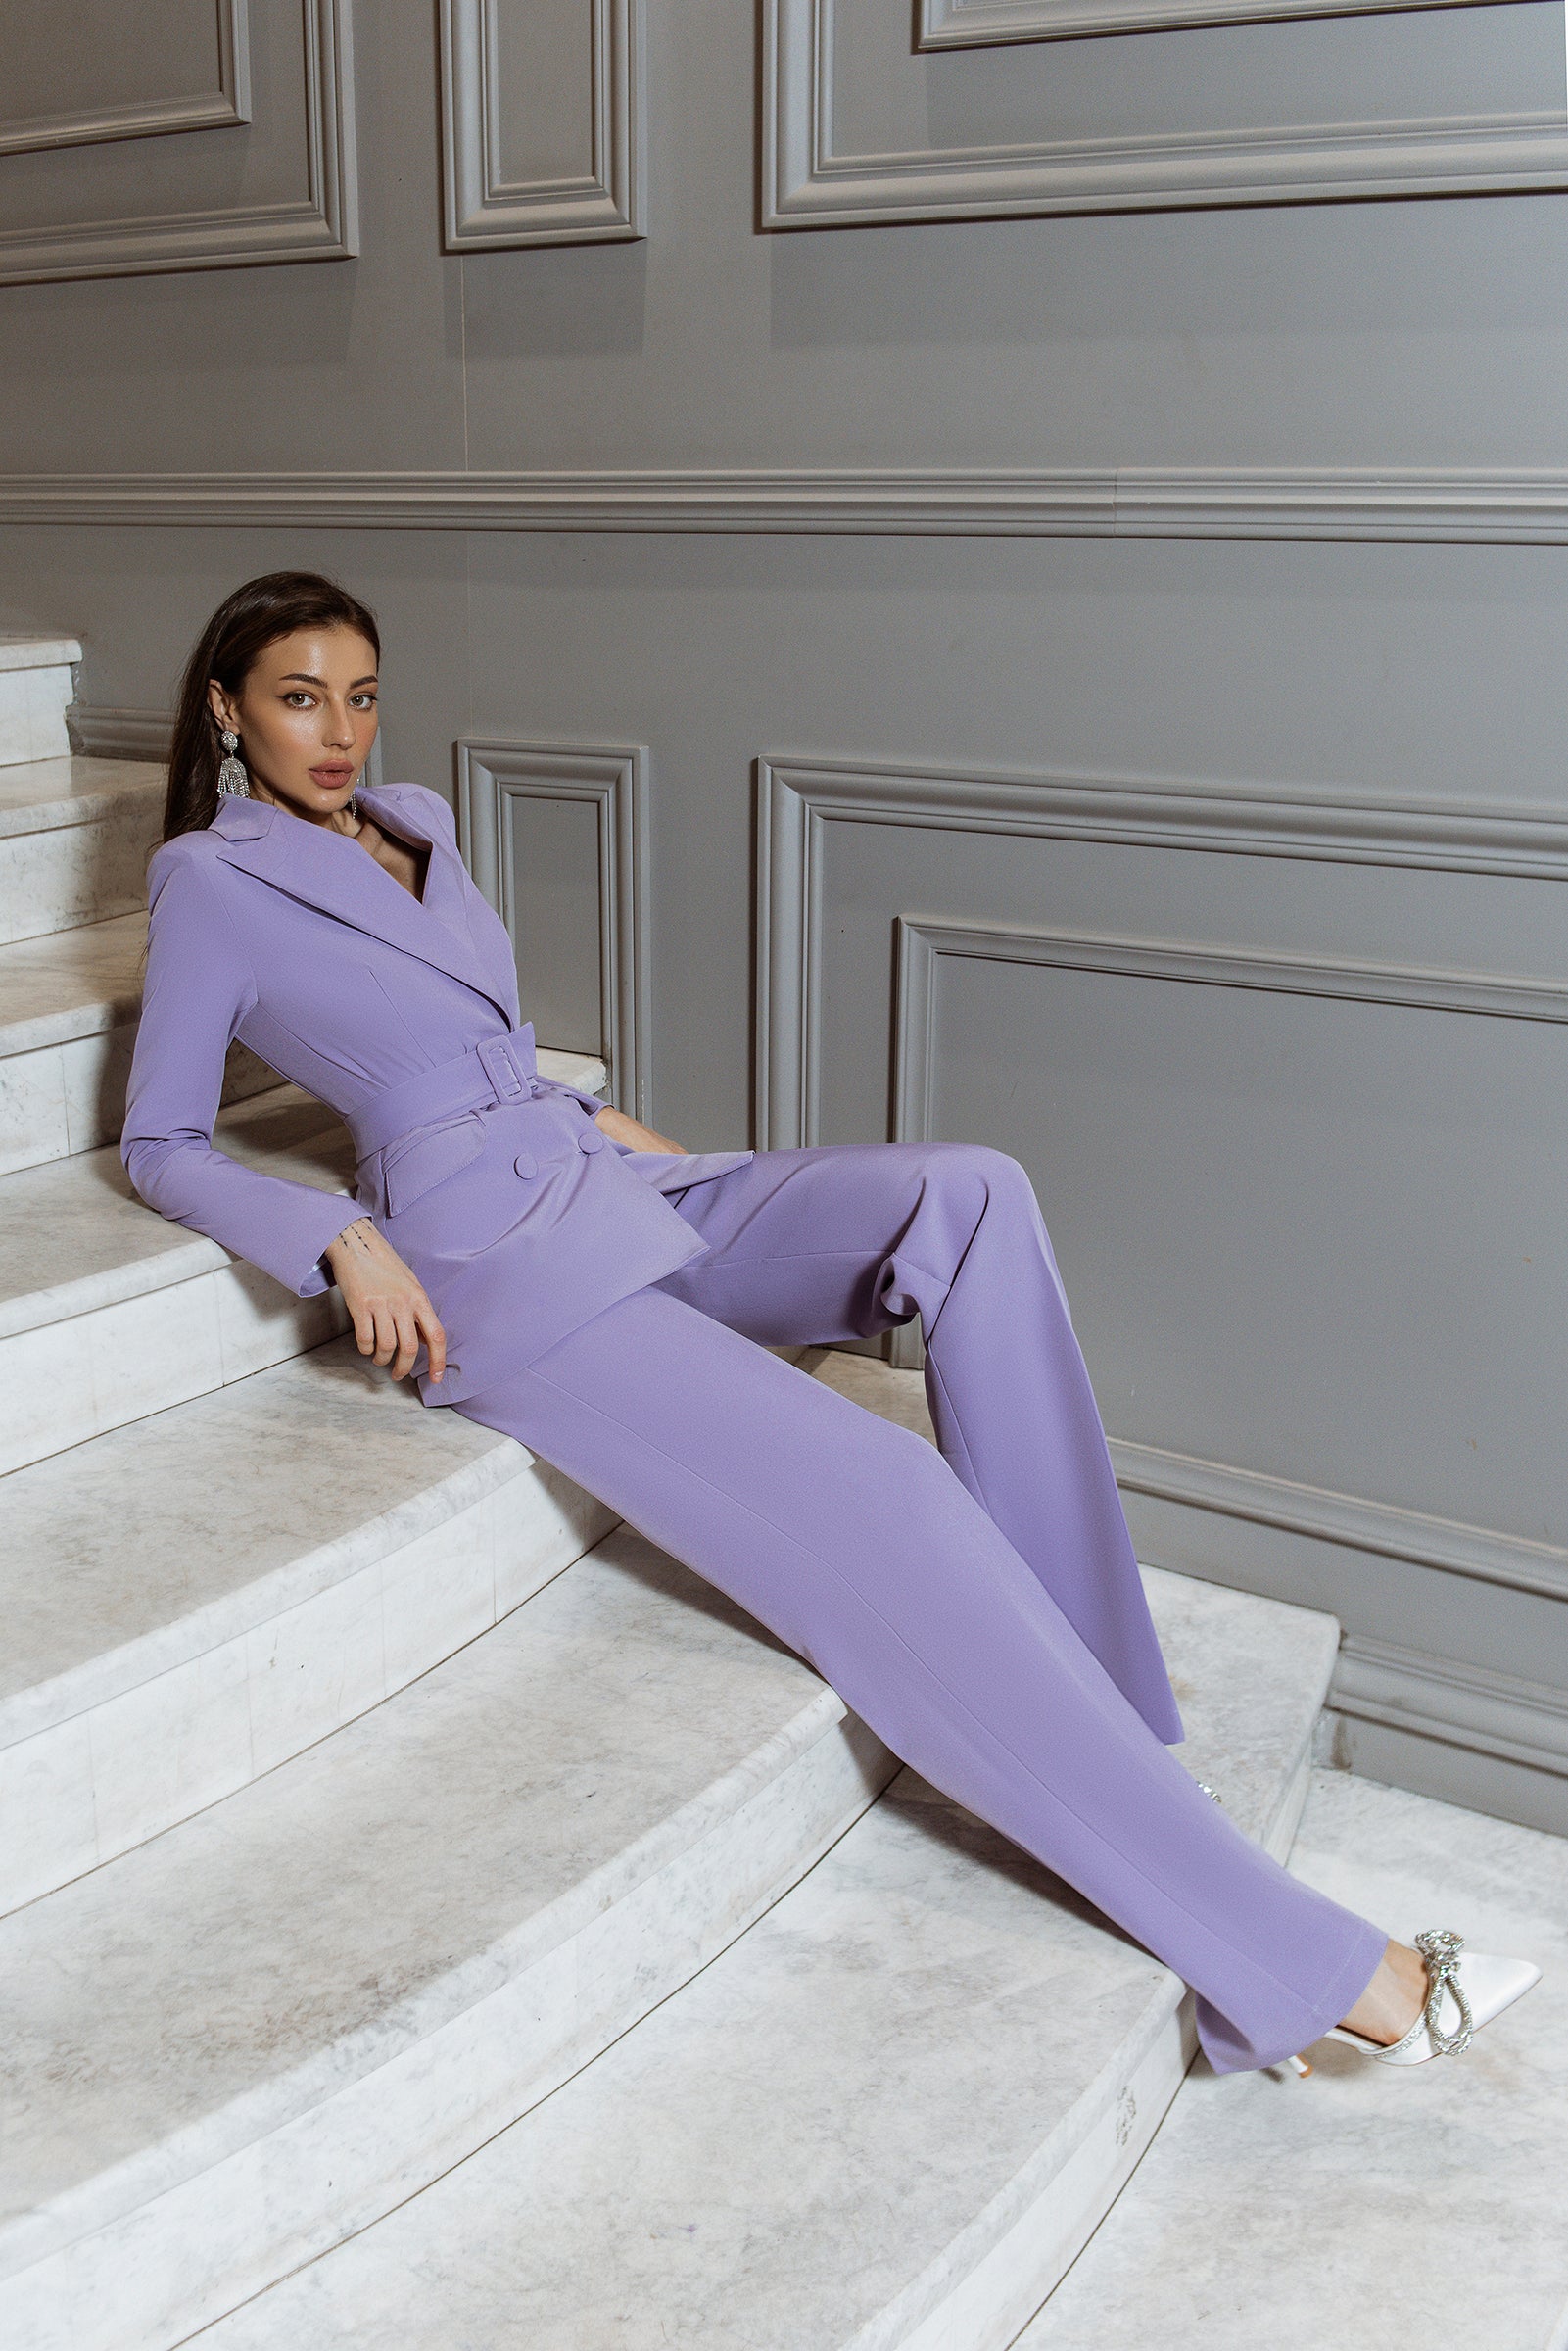 Lavender Belted Double Breasted Suit 2-Piece